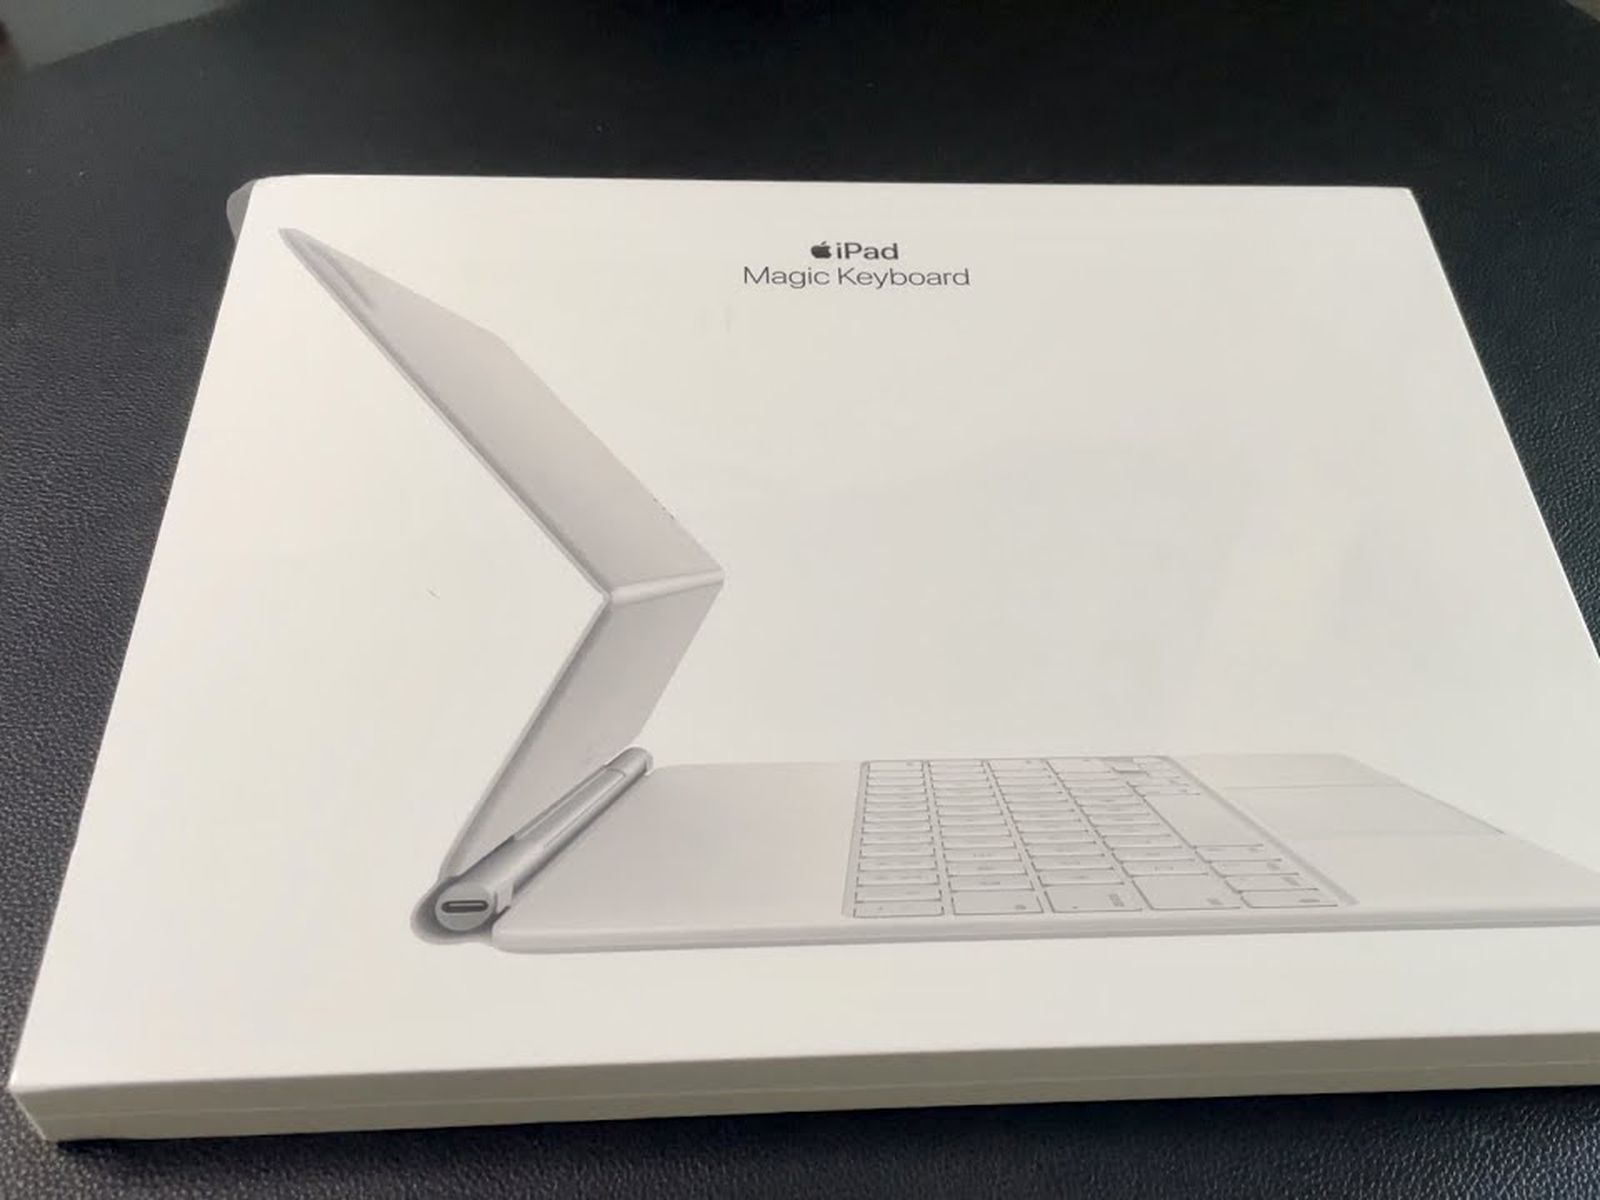 First White Magic Keyboard for iPad Pro Unboxing Surfaces Online - MacRumors